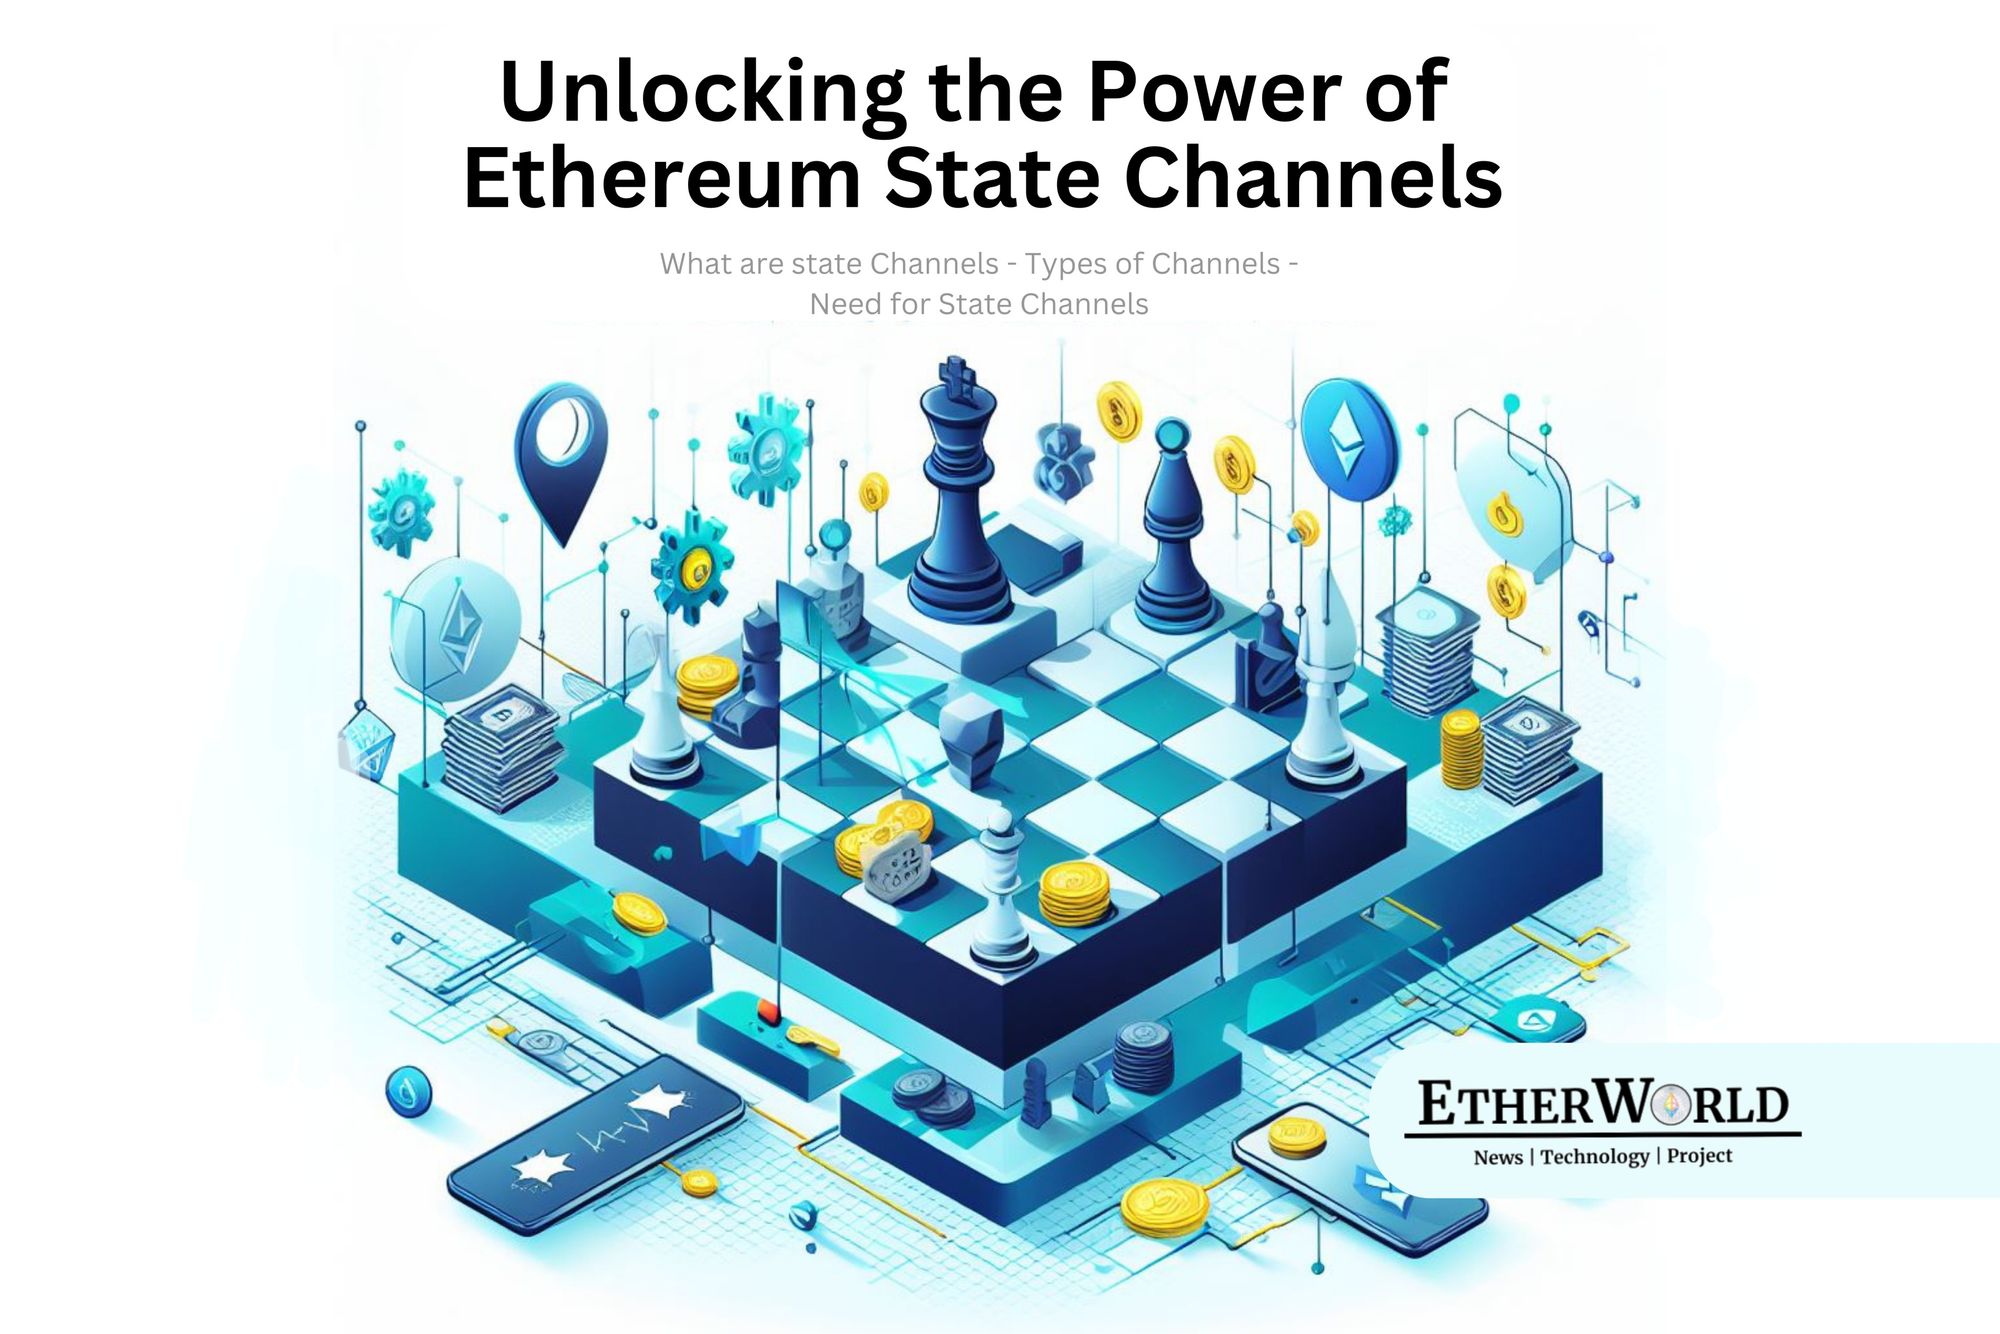 Ethereum State Channels